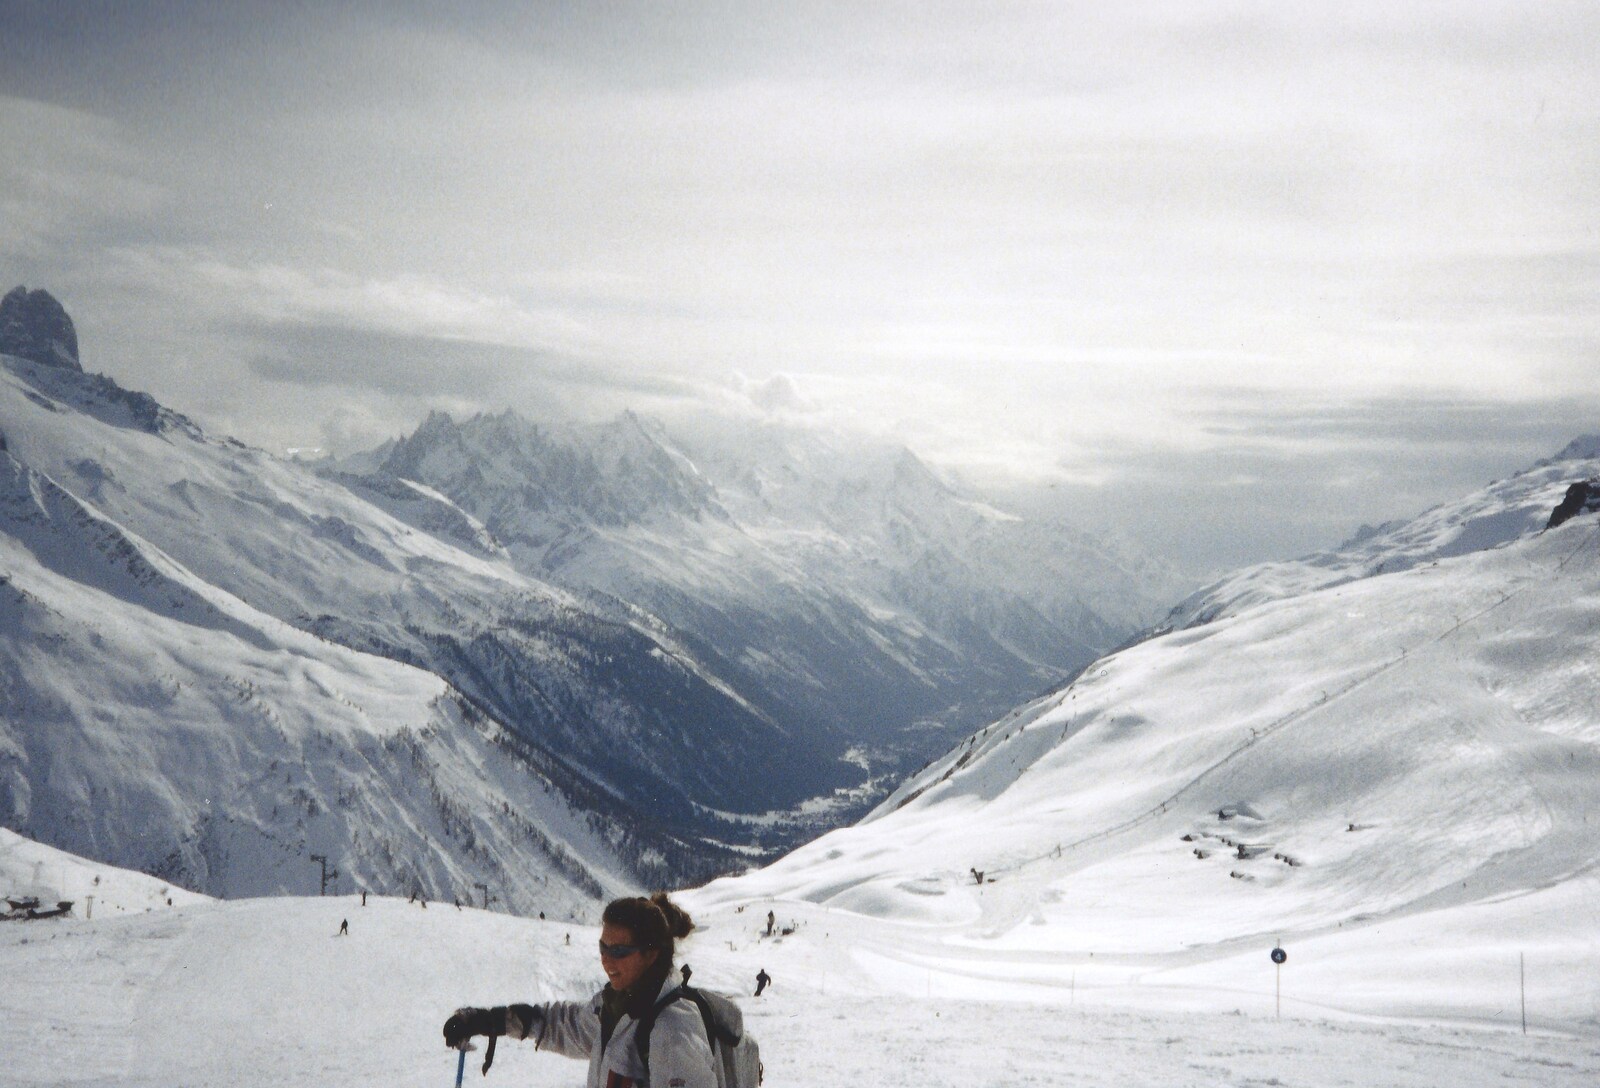 Skiing With Sean, Chamonix, Haute-Savoie, France - 15th March 1999: A view down the mountains